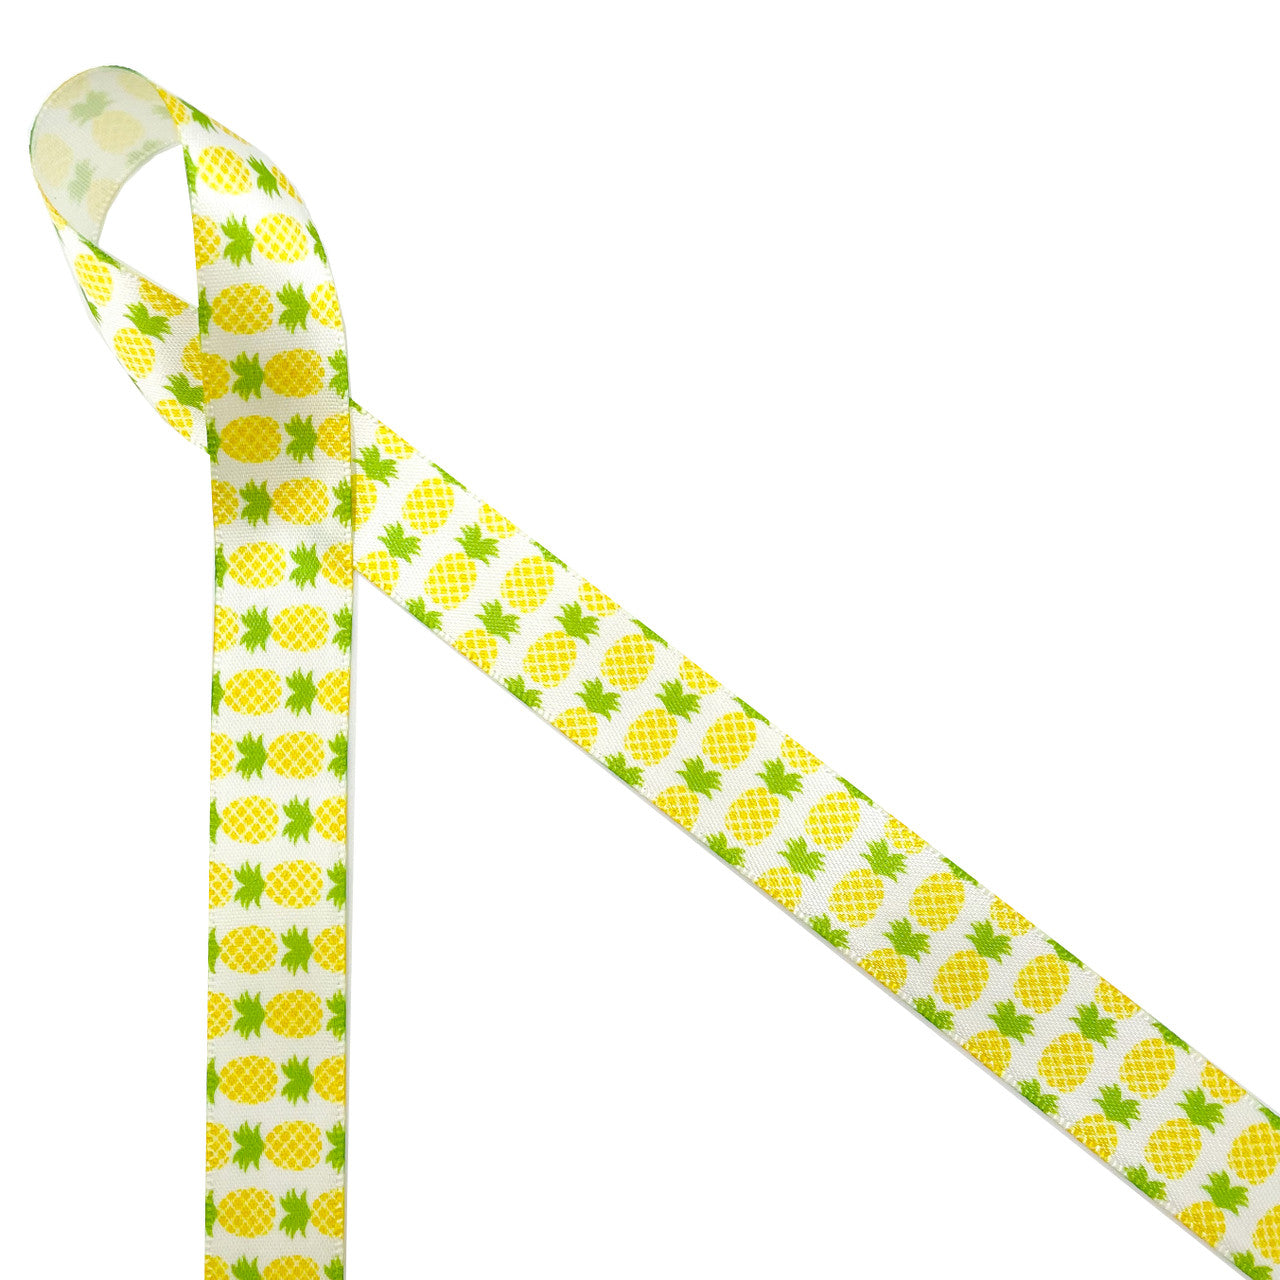 Pineapples line up in green and yellow on 5/8" white single face satin ribbon. A long time symbol of hospitality, tying this ribbon on your party favors will let you guest know they are welcome and appreciated!